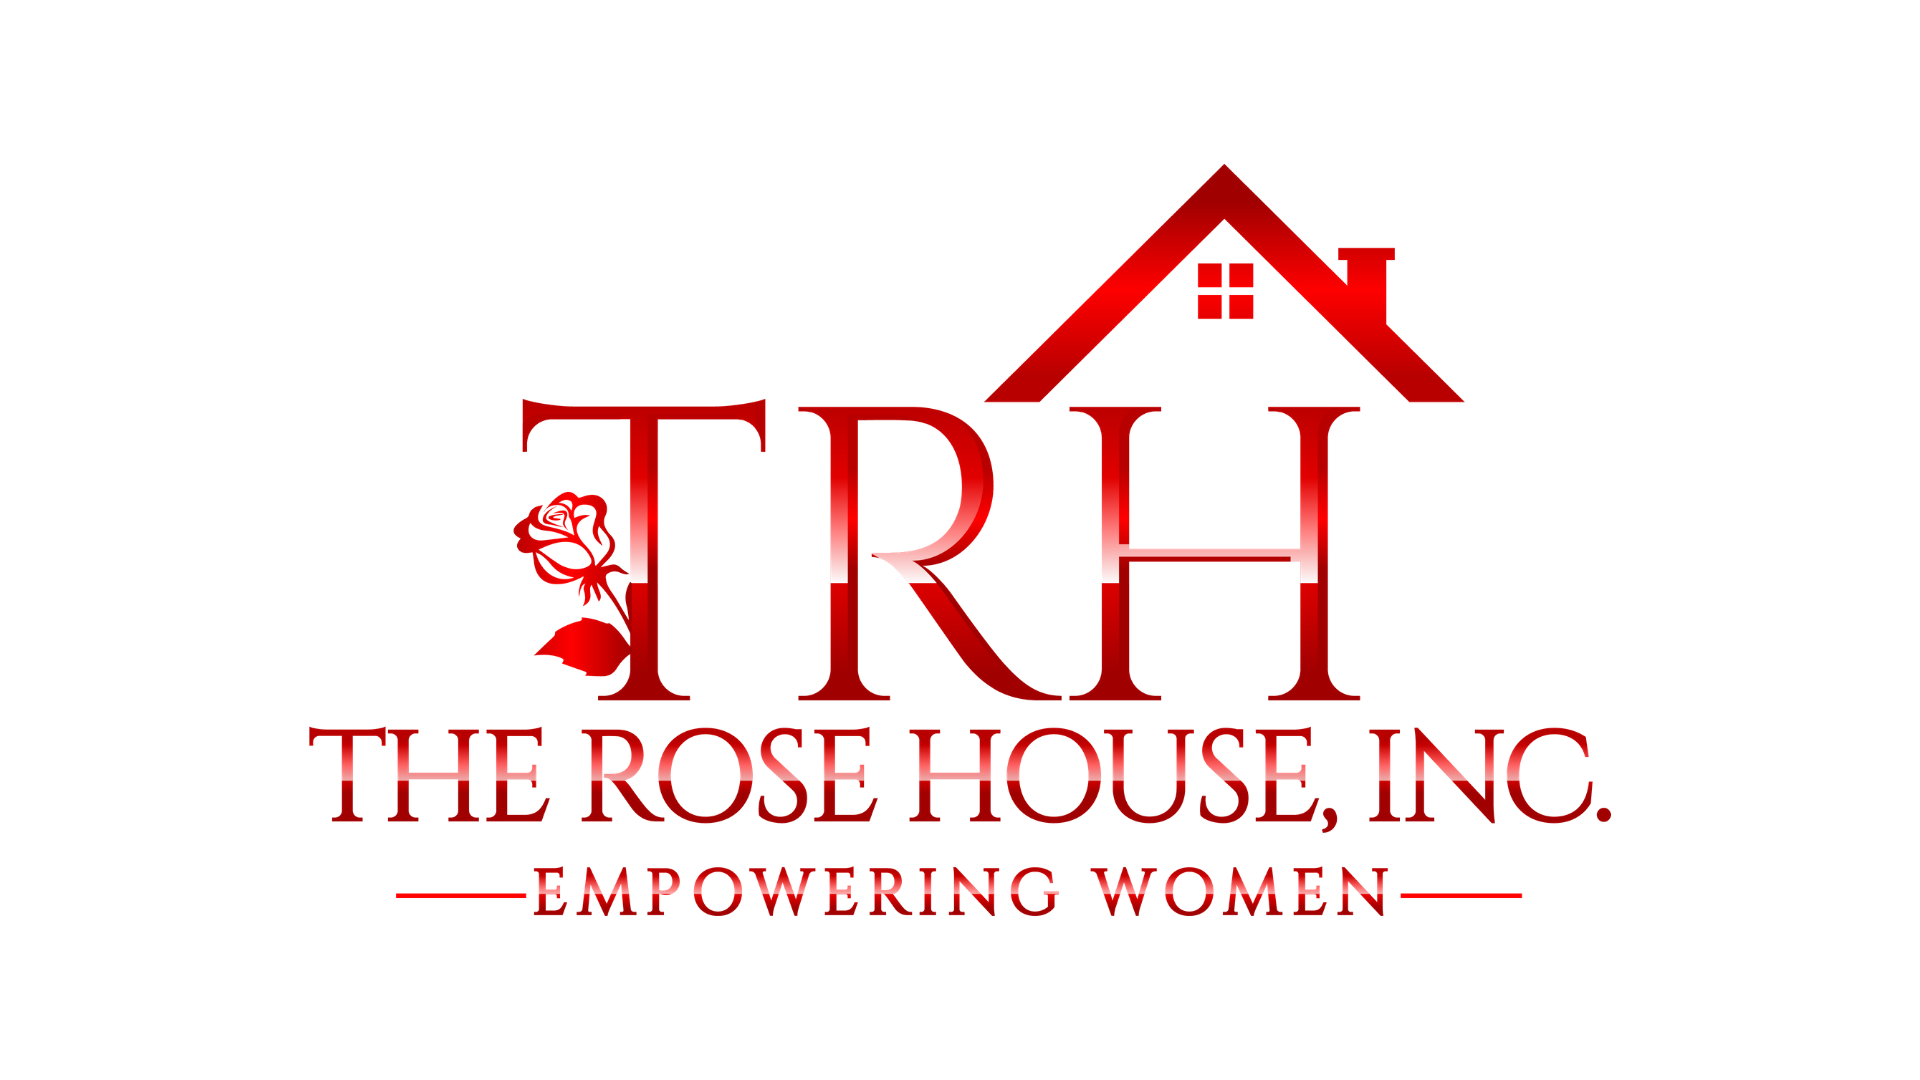 The Rose House Inc